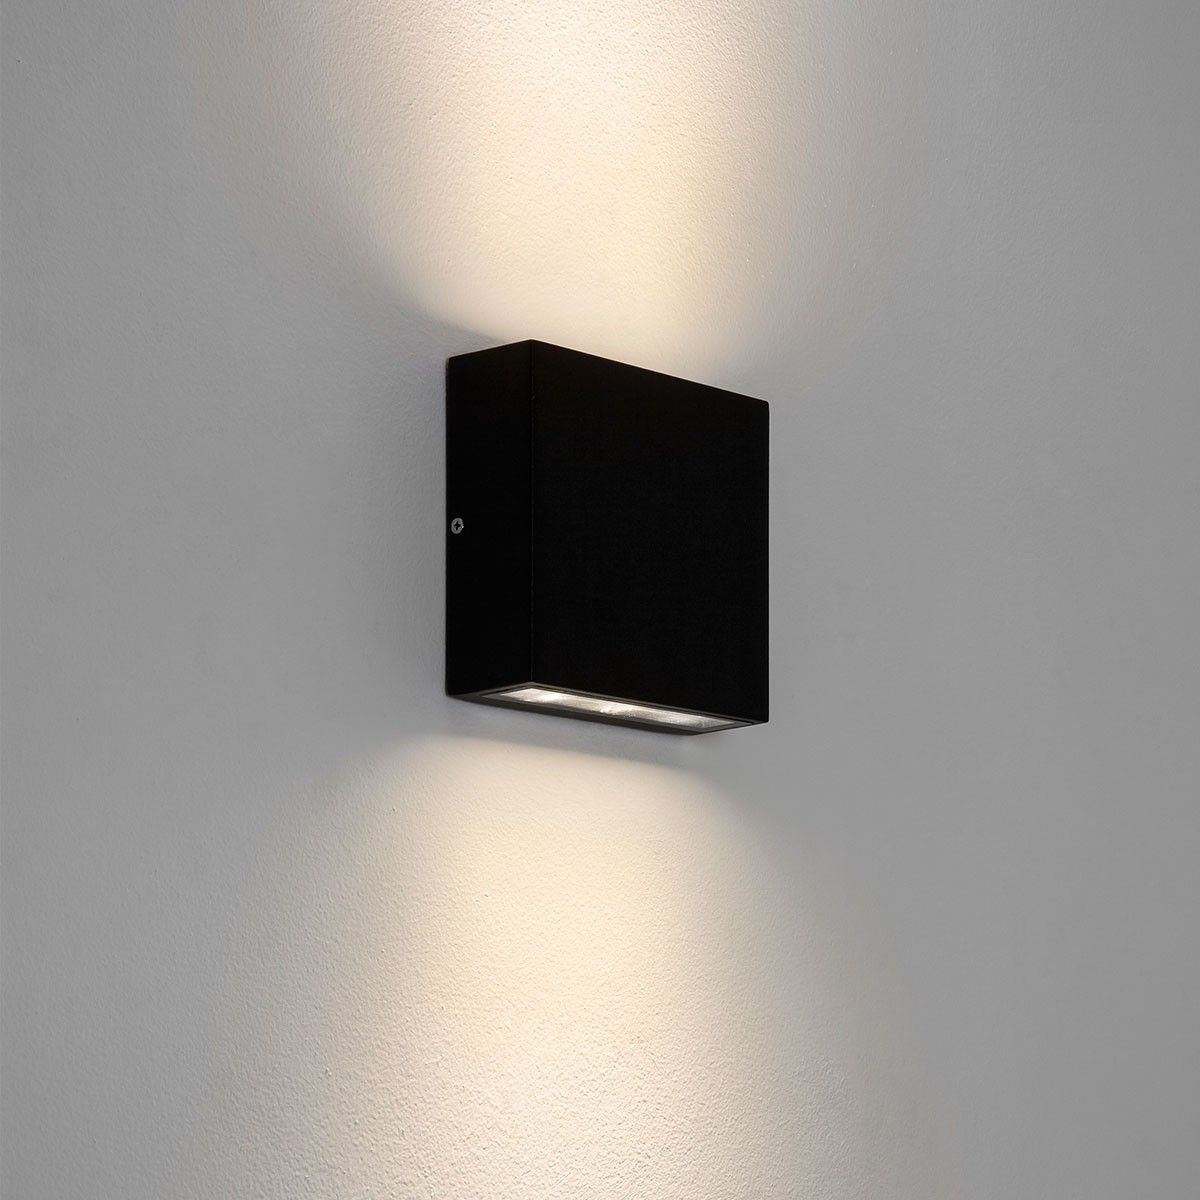 Astro Elis Twin Black Outdoor Led Wall Light At Uk Electrical Supplies (View 7 of 15)